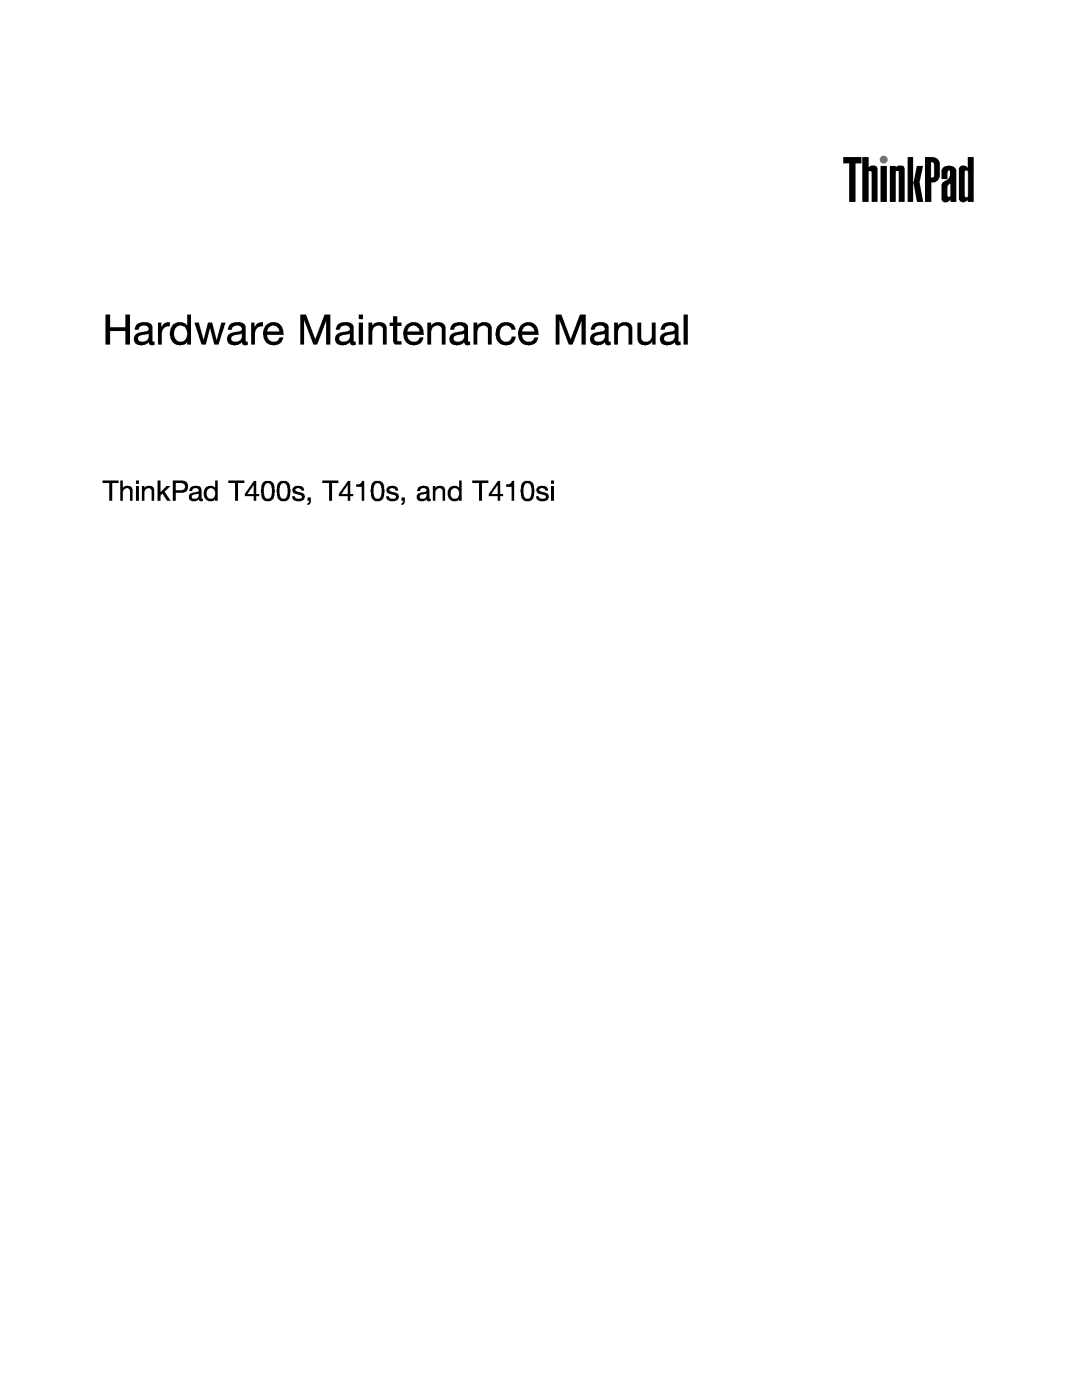 IBM T400S, T410SI manual Hardware Maintenance Manual, ThinkPad T400s, T410s, and T410si 